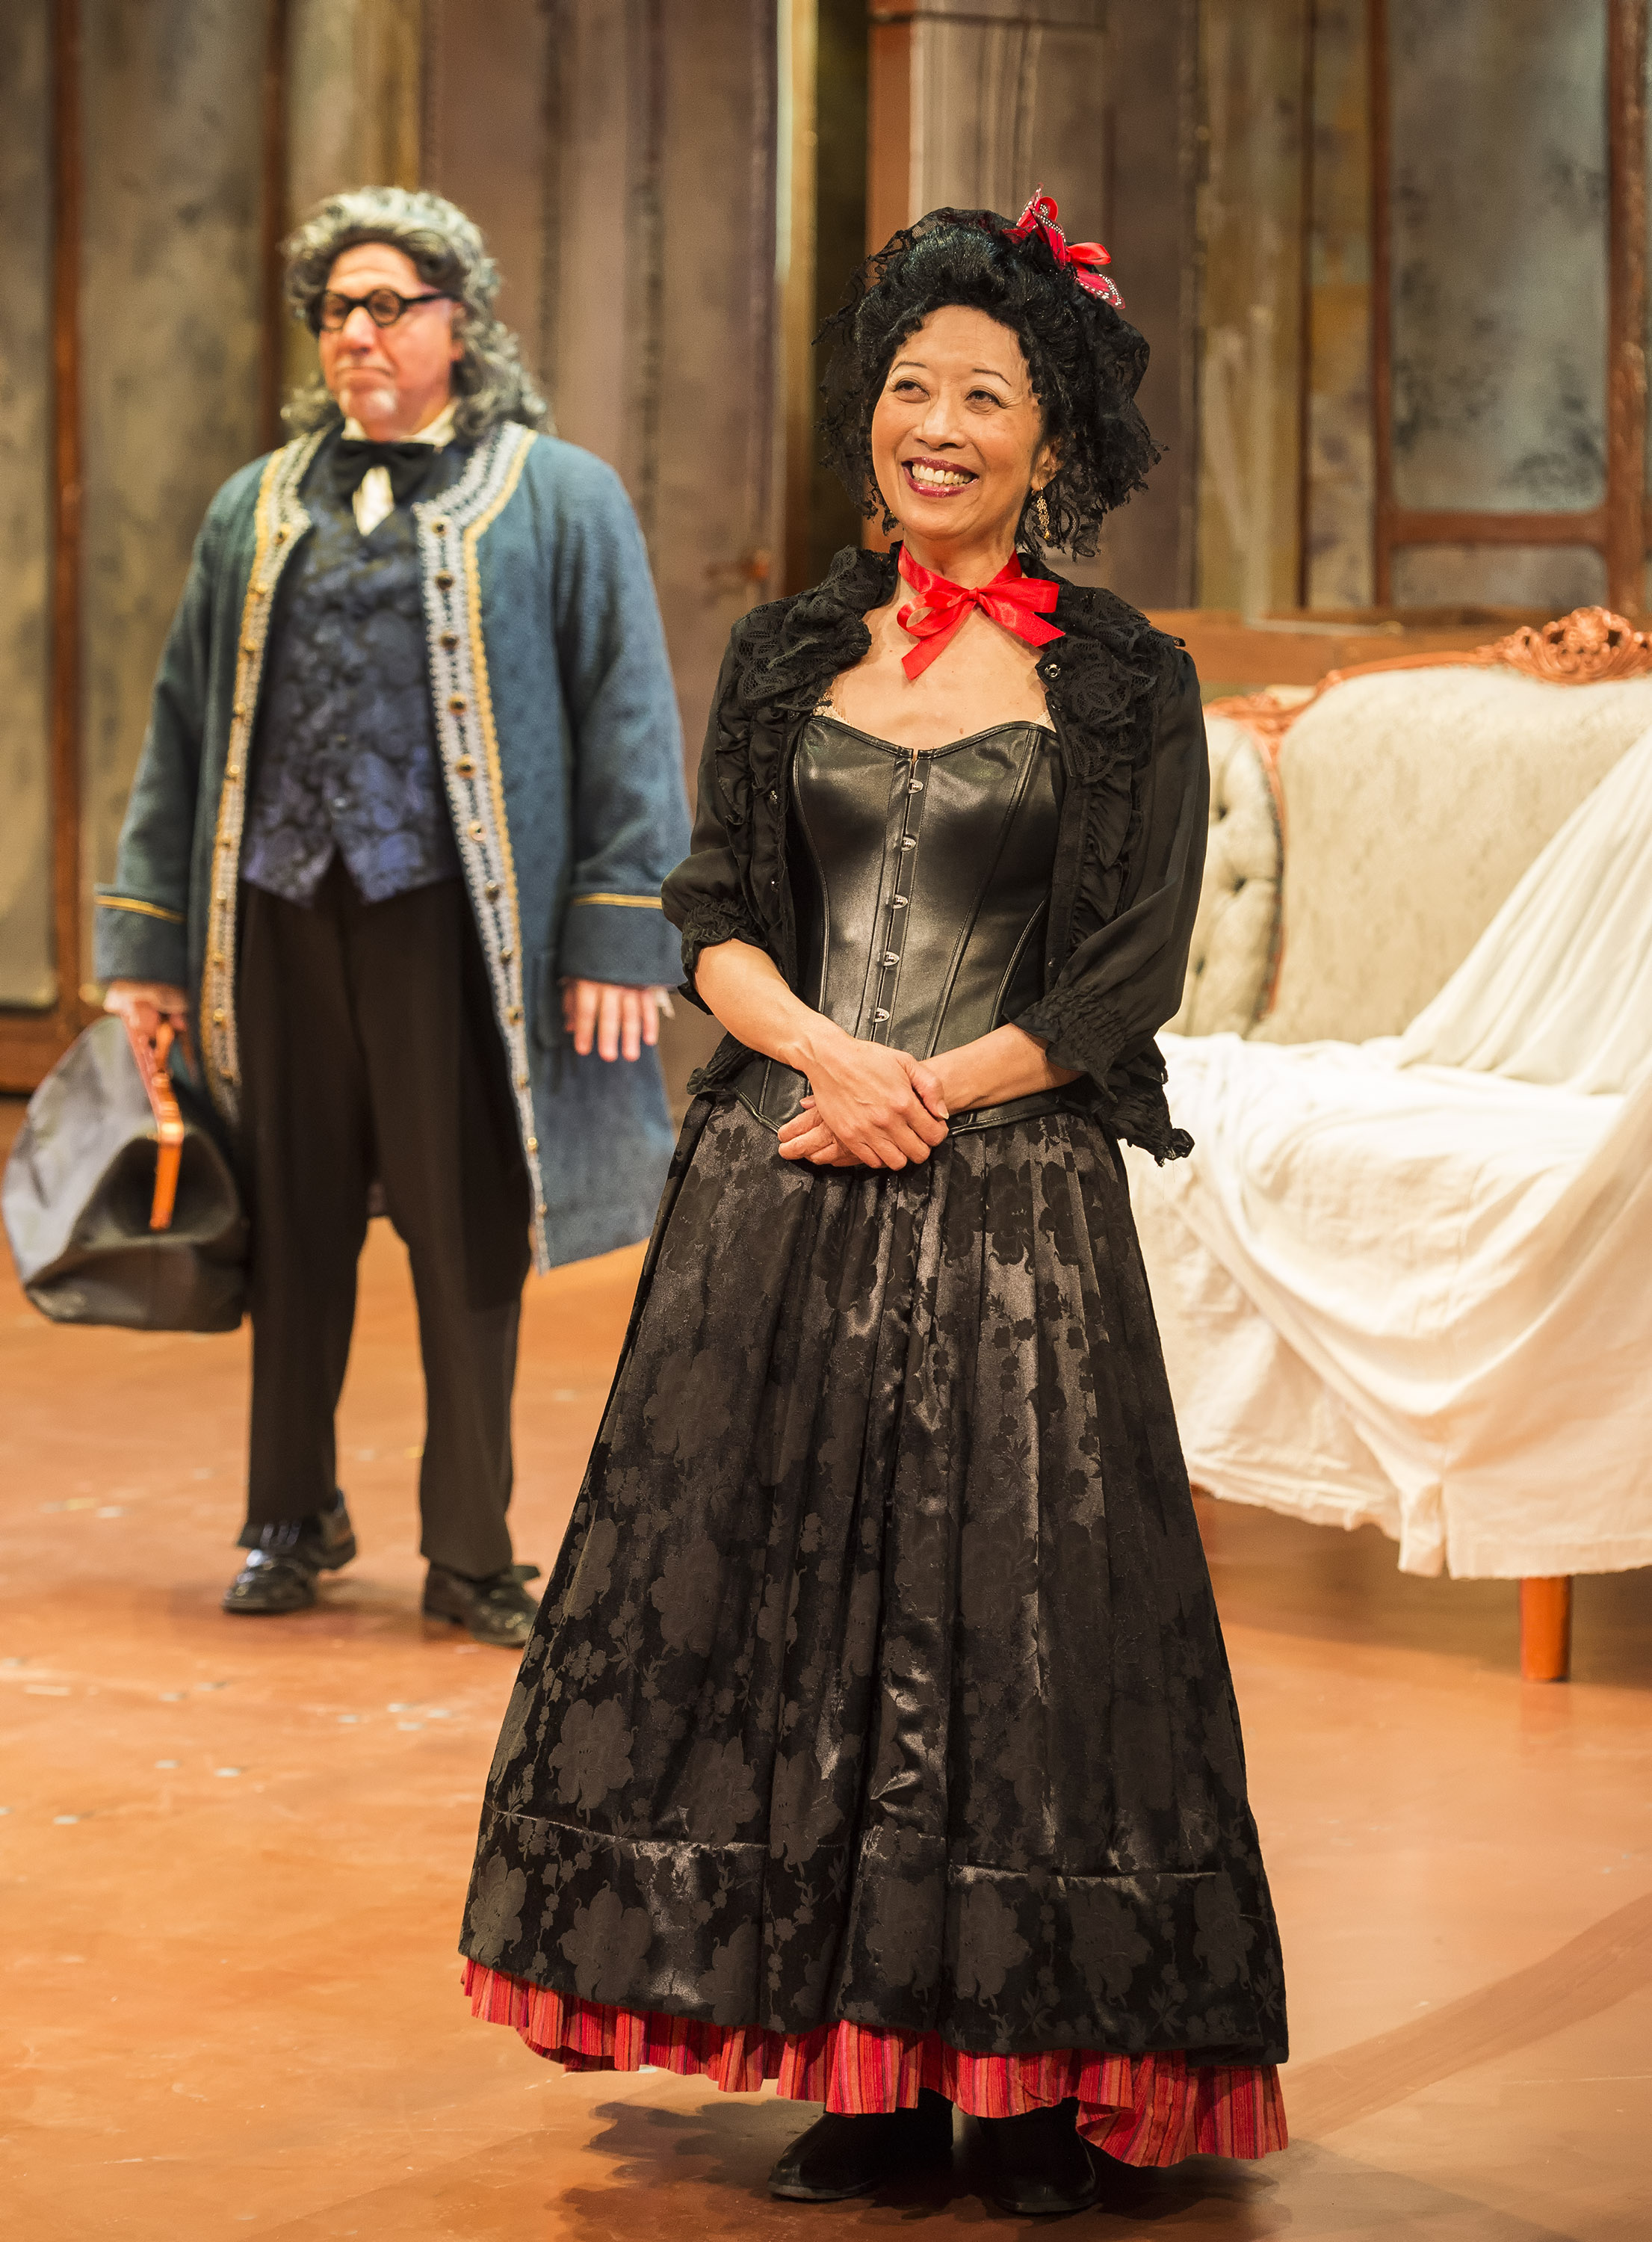 Jeanne Sakata as Marceline in Charles Morey's adaptation of FIGARO, directed by Michael Michetti at A Noise Within in Pasadena, March 2015